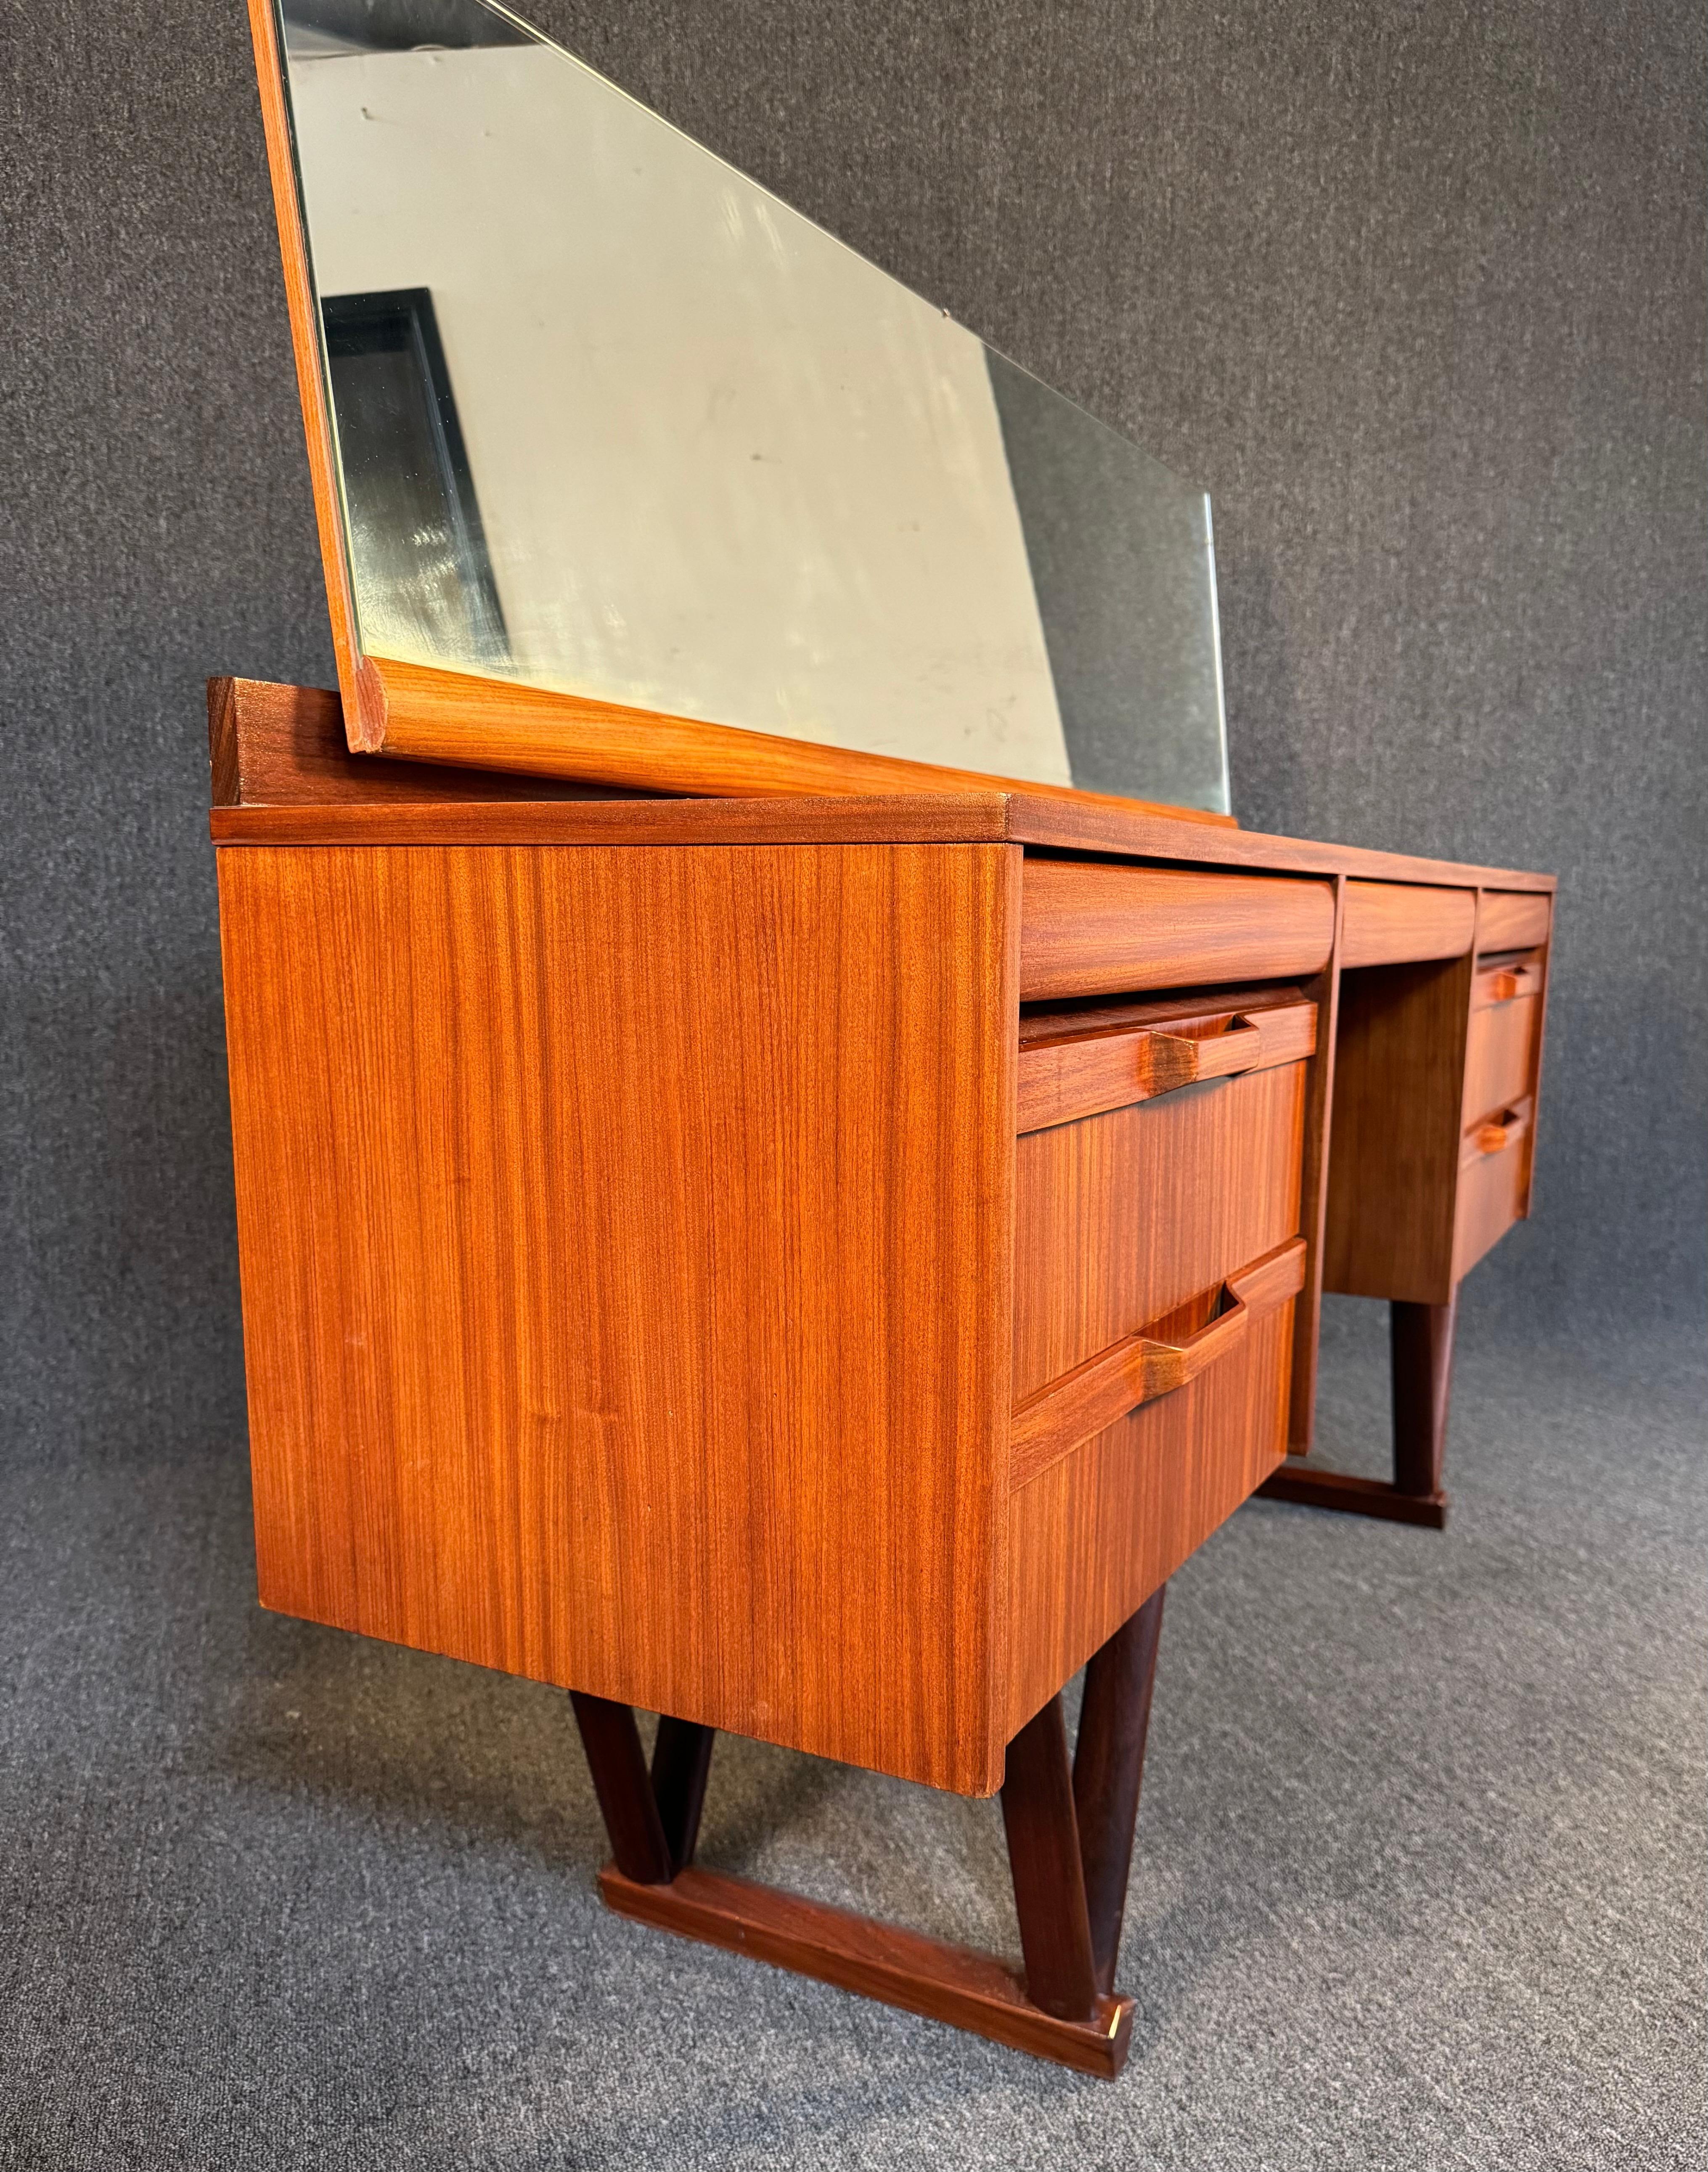 Here is a beautiful British MCM dressing table in afromasia teak manufactured by Elliotts of Newbury in England in the 1960's.
This special piece, recently imported from Europe to California before use refinishing, features a vibrant wood grain, a